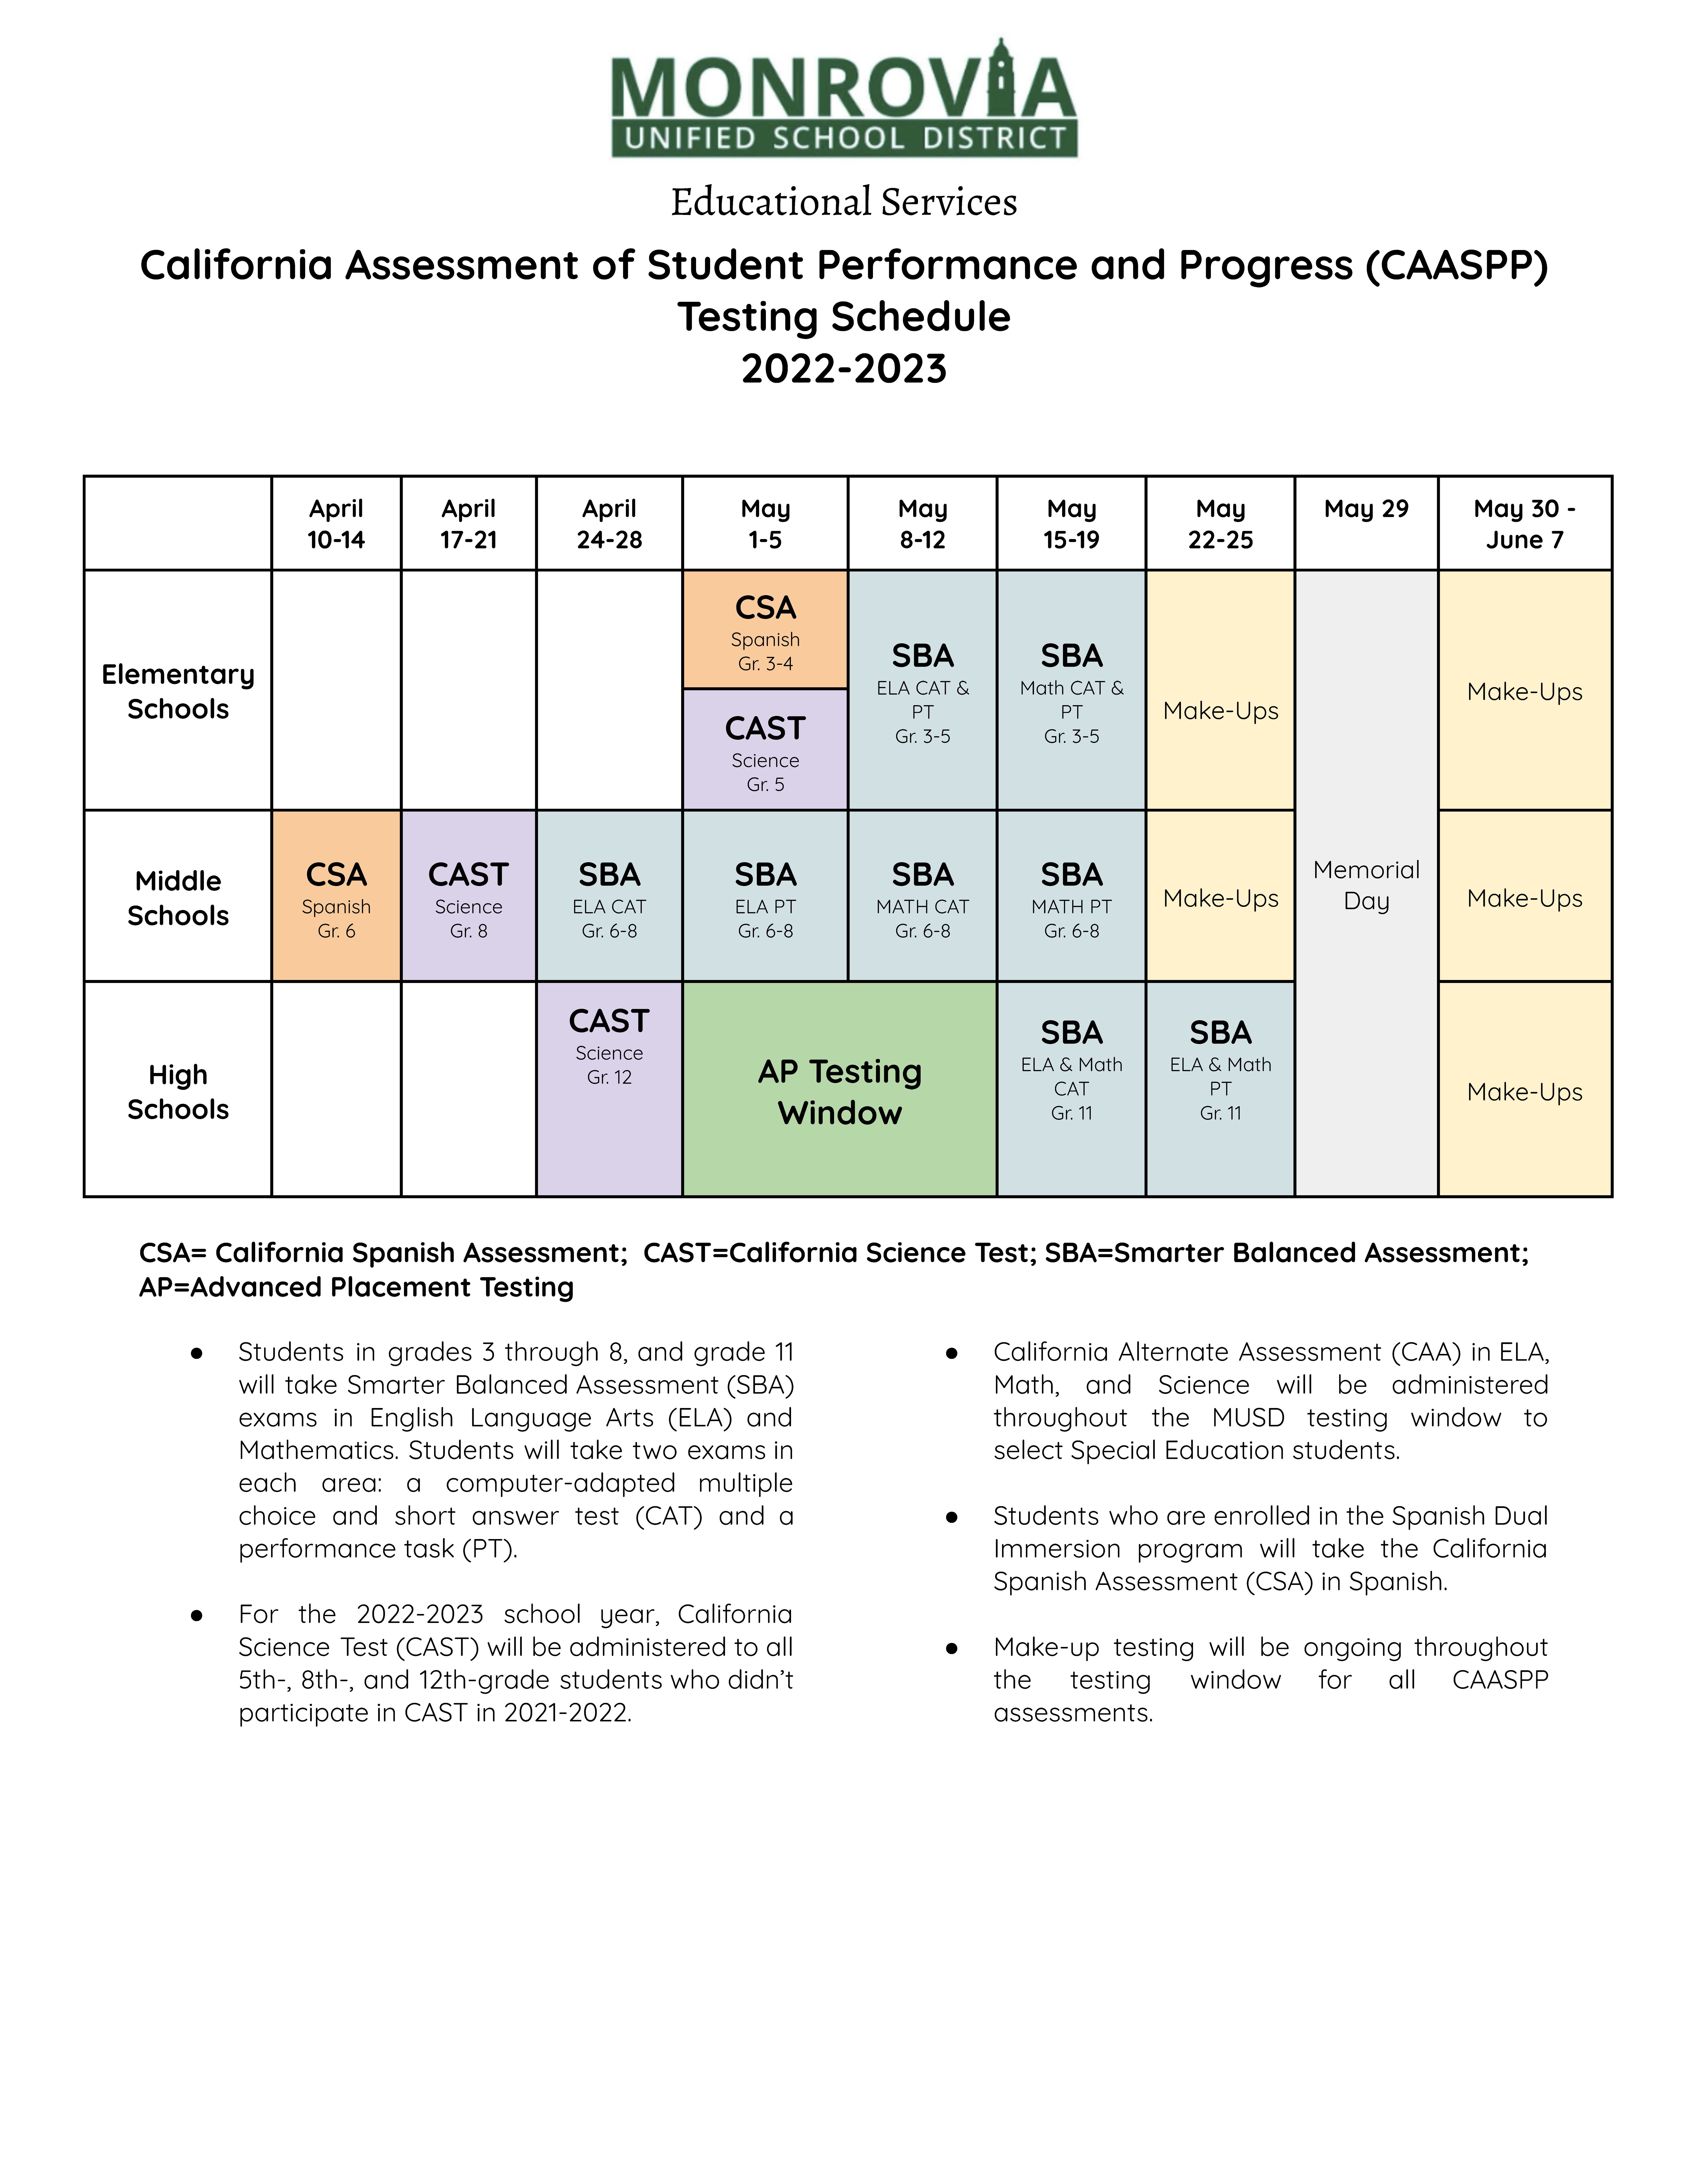 With the school year winding down, the California Assessment of Student Performance and Progress (CAASPP) testing window is set to open.  CAASPP is essentially a variety of tests that the State of California requires for accountability purposes.